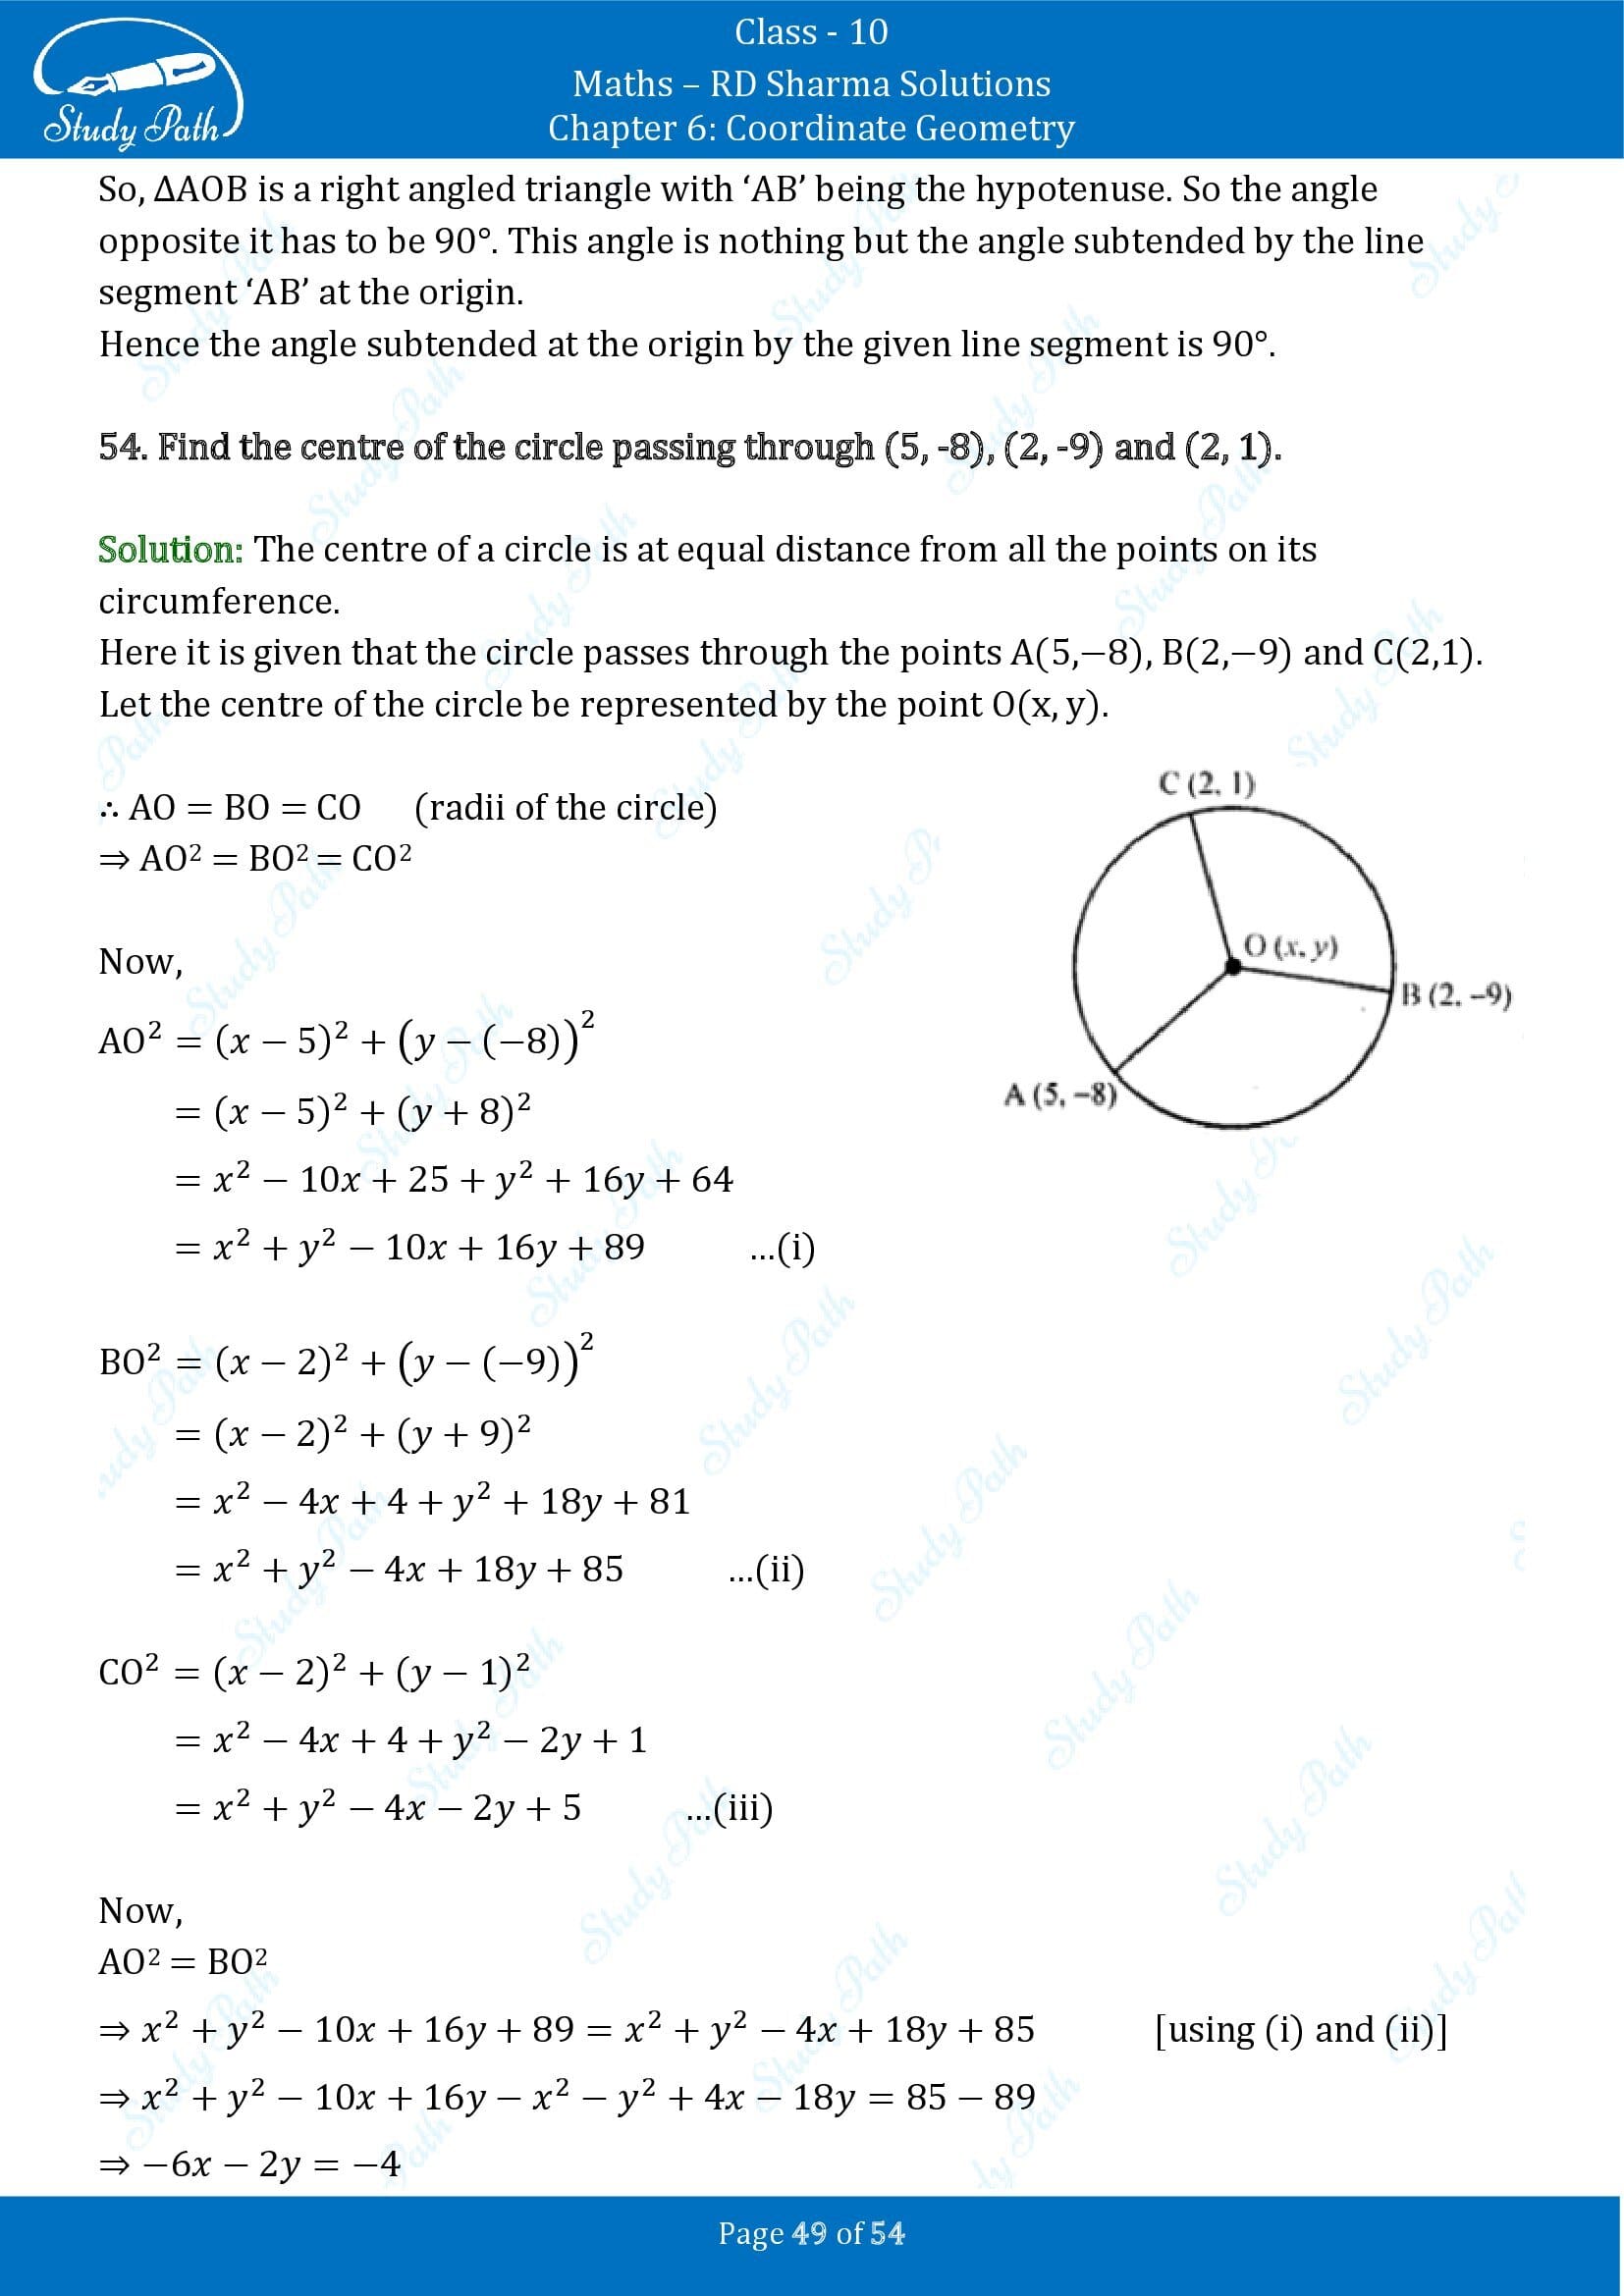 RD Sharma Solutions Class 10 Chapter 6 Coordinate Geometry Exercise 6.2 0049